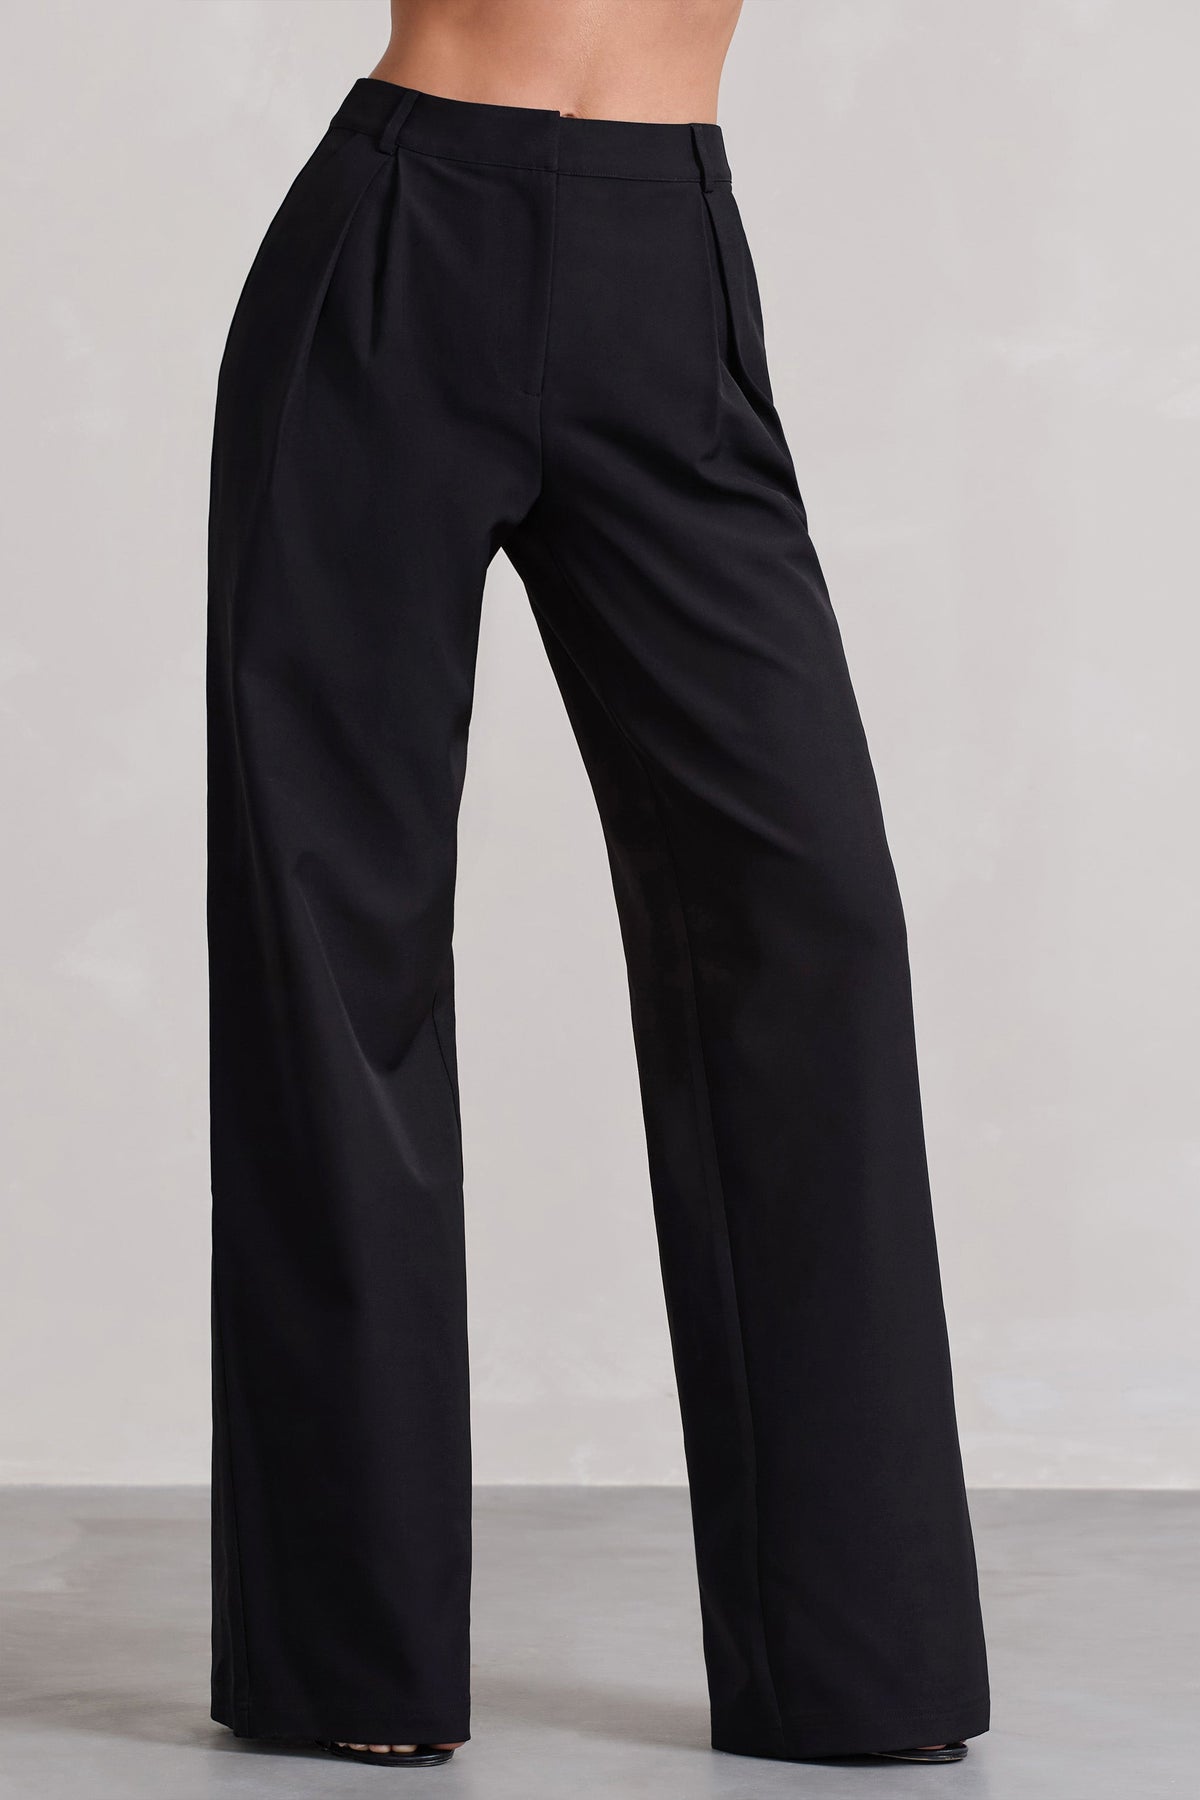 Quince Womens Stretch Crepe Pleated Wide Leg Pants Black XS